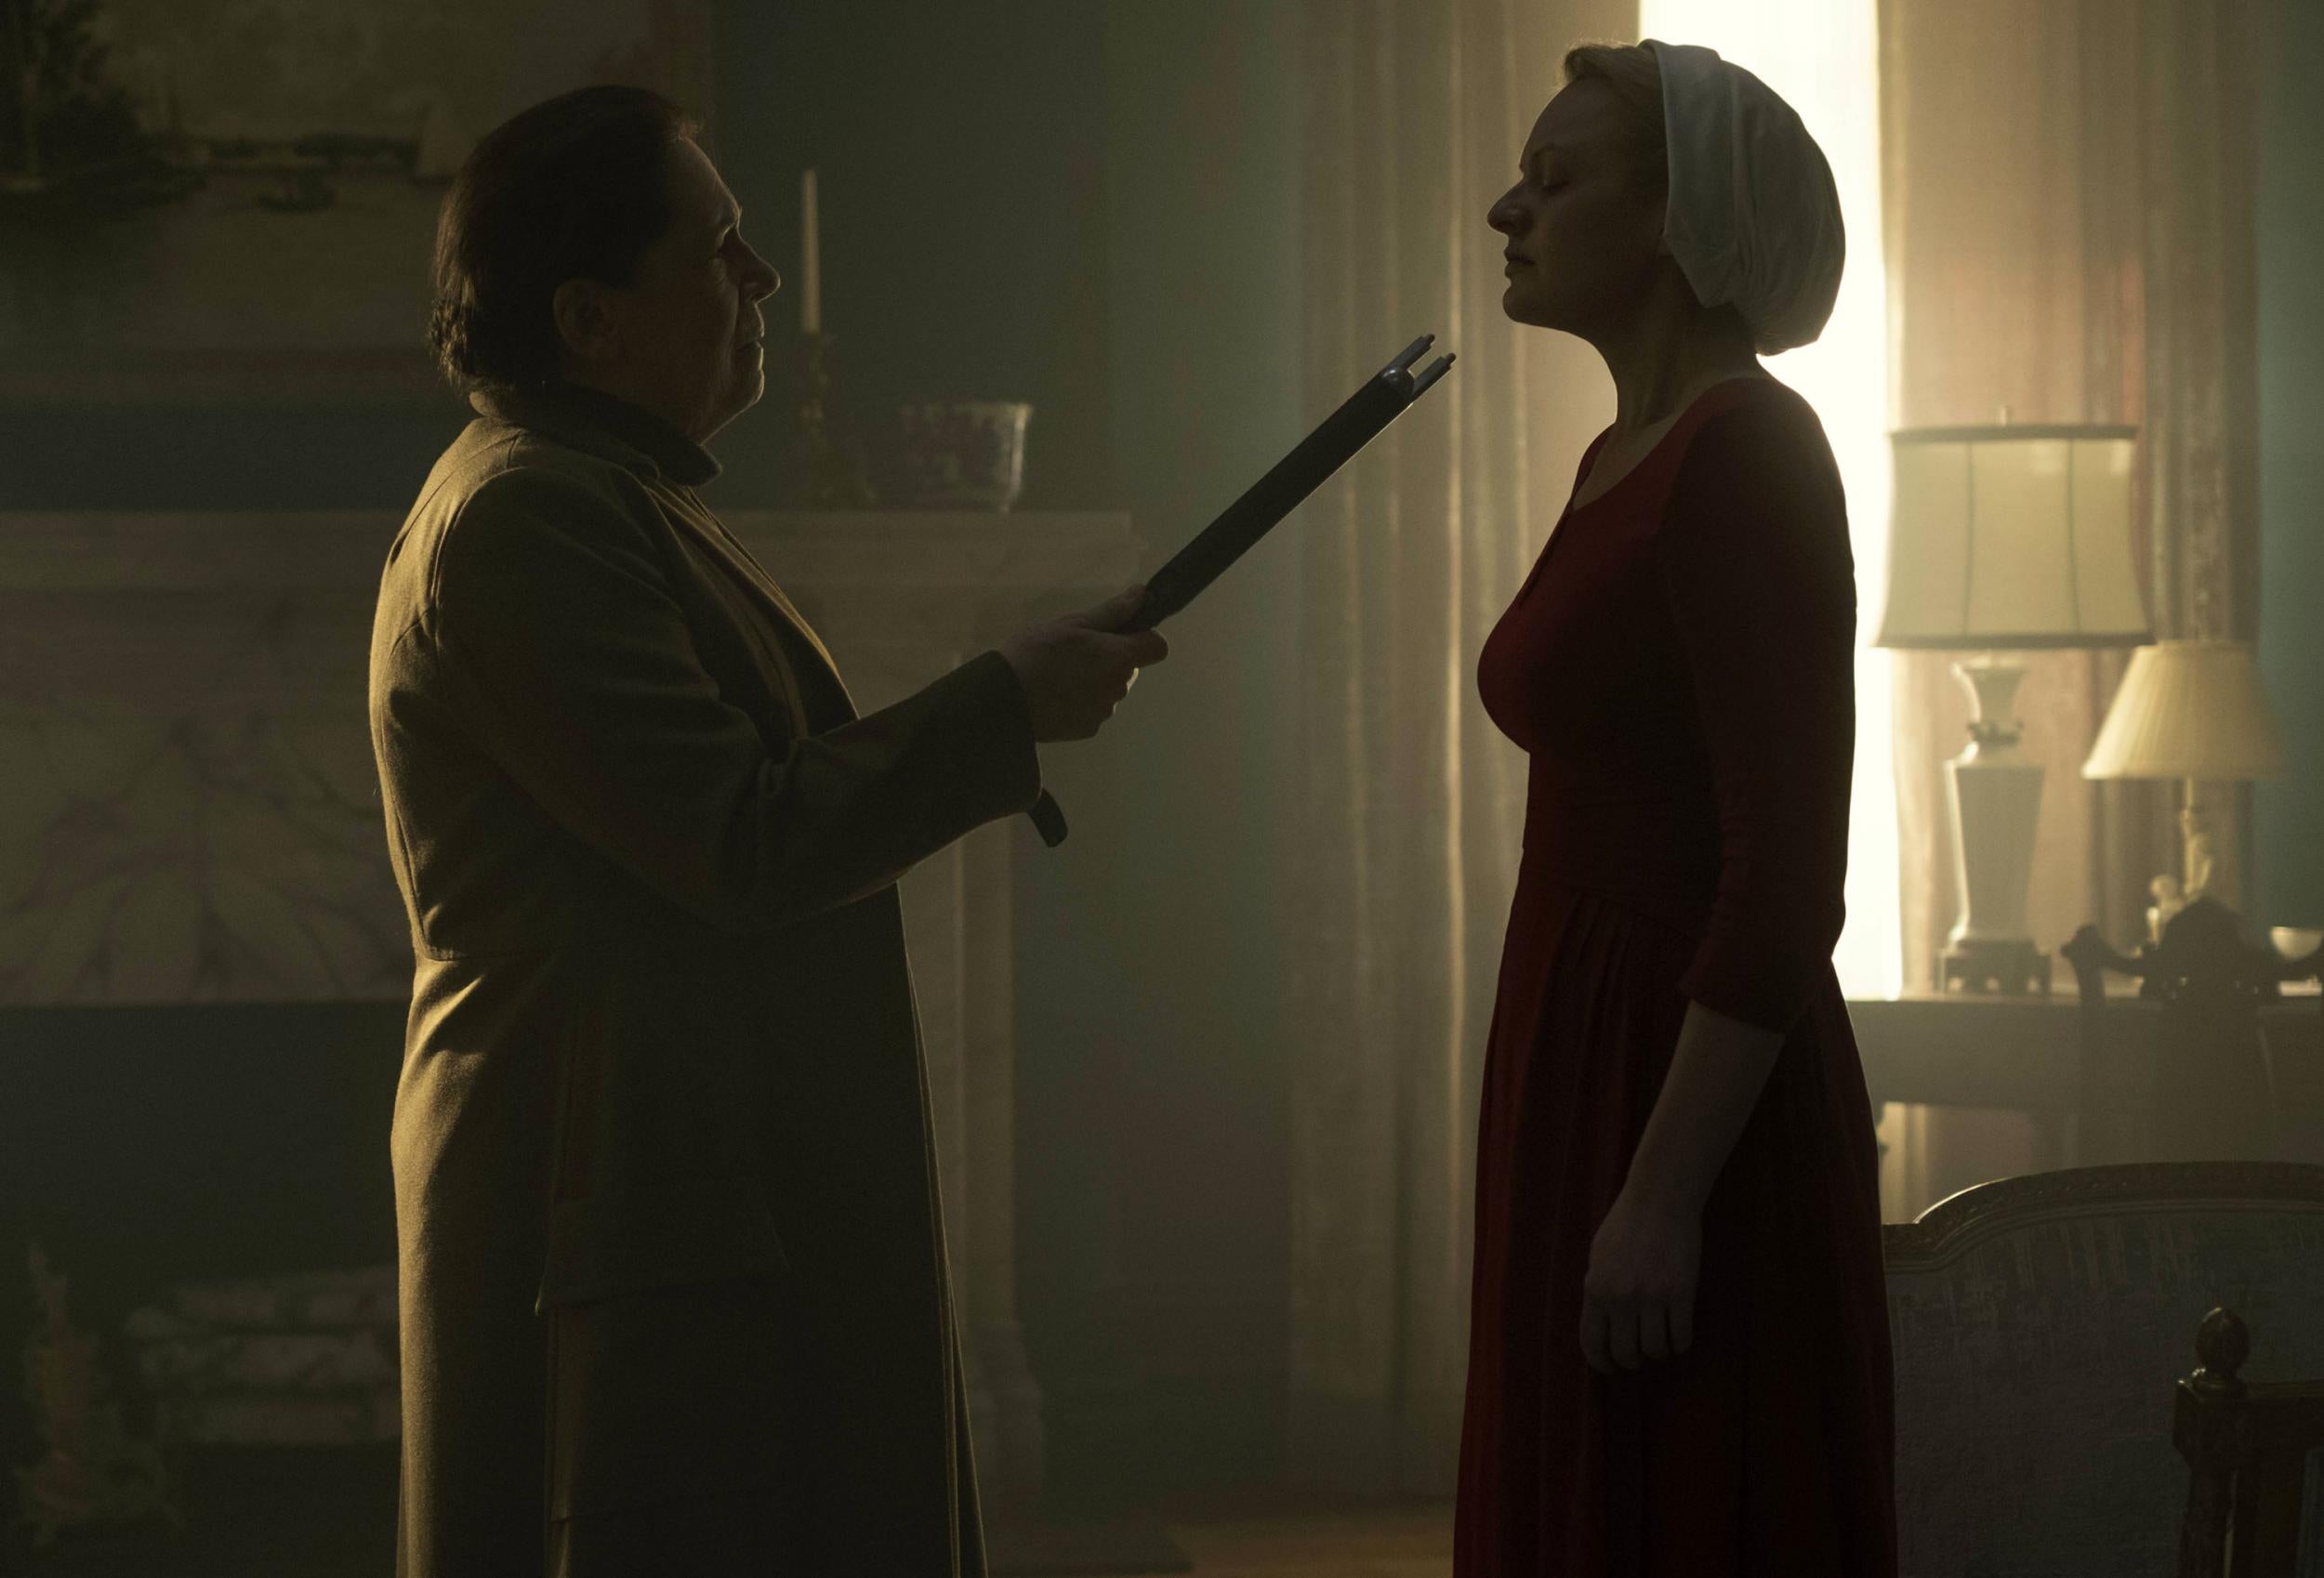 Ann Dowd and Elisabeth Moss as Aunt Lydia and Offred in ‘The Handmaid’s Tale’